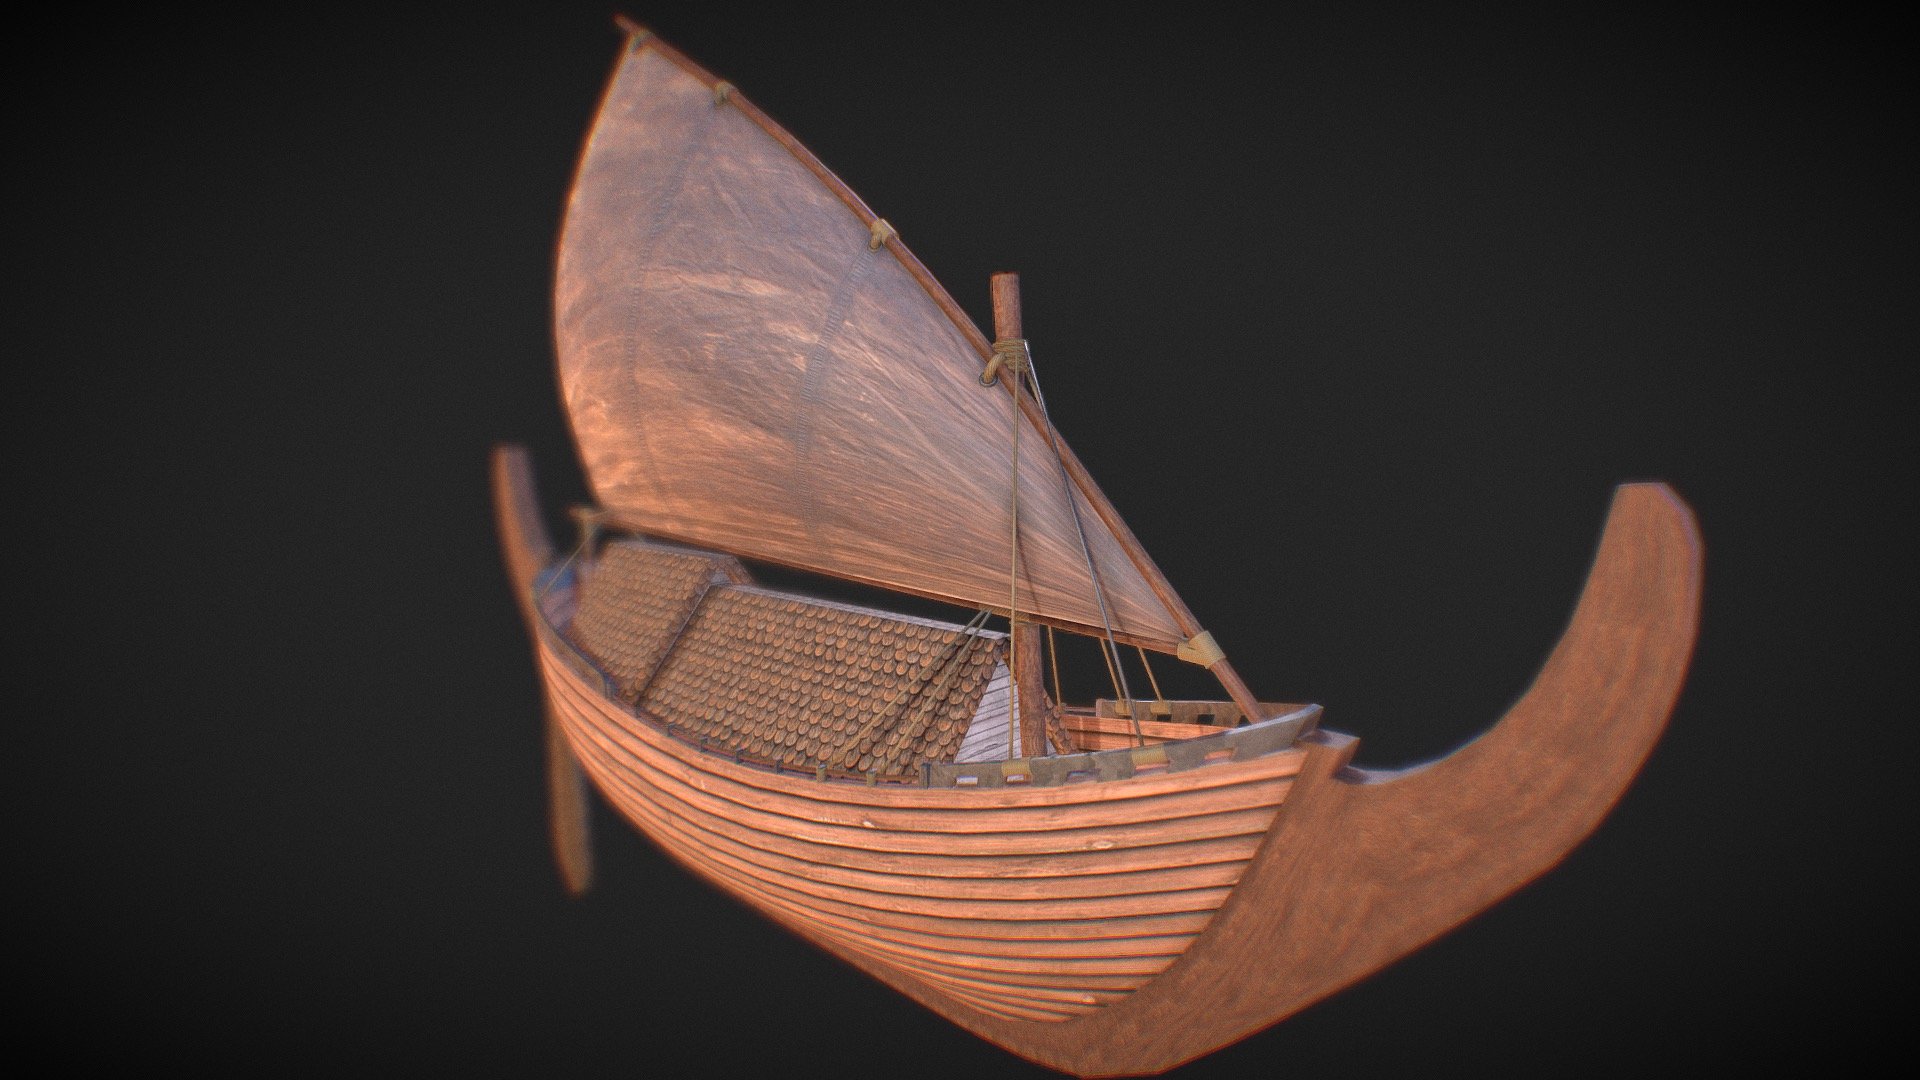 Another one of Indonesia's cultural heritage, Perahu Golekan Lete is traditional ship from Sulawesi used by local fisherman and merchants.

The model is part of Samudera Raksa museum interactive content in Magelang, Central Java, Indonesia 3d model